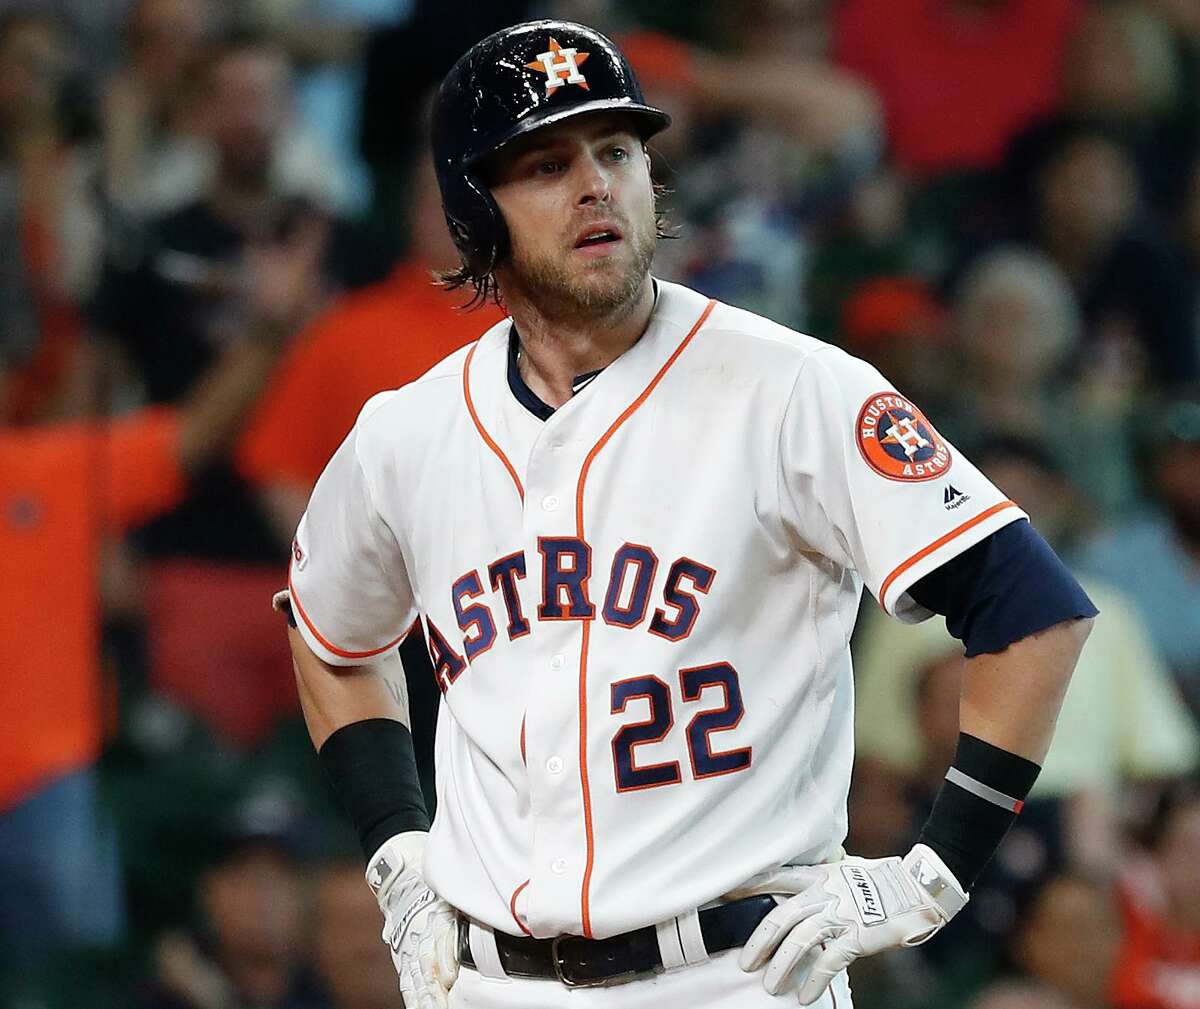 All that and for what? Astros lose 9-8 to Rays